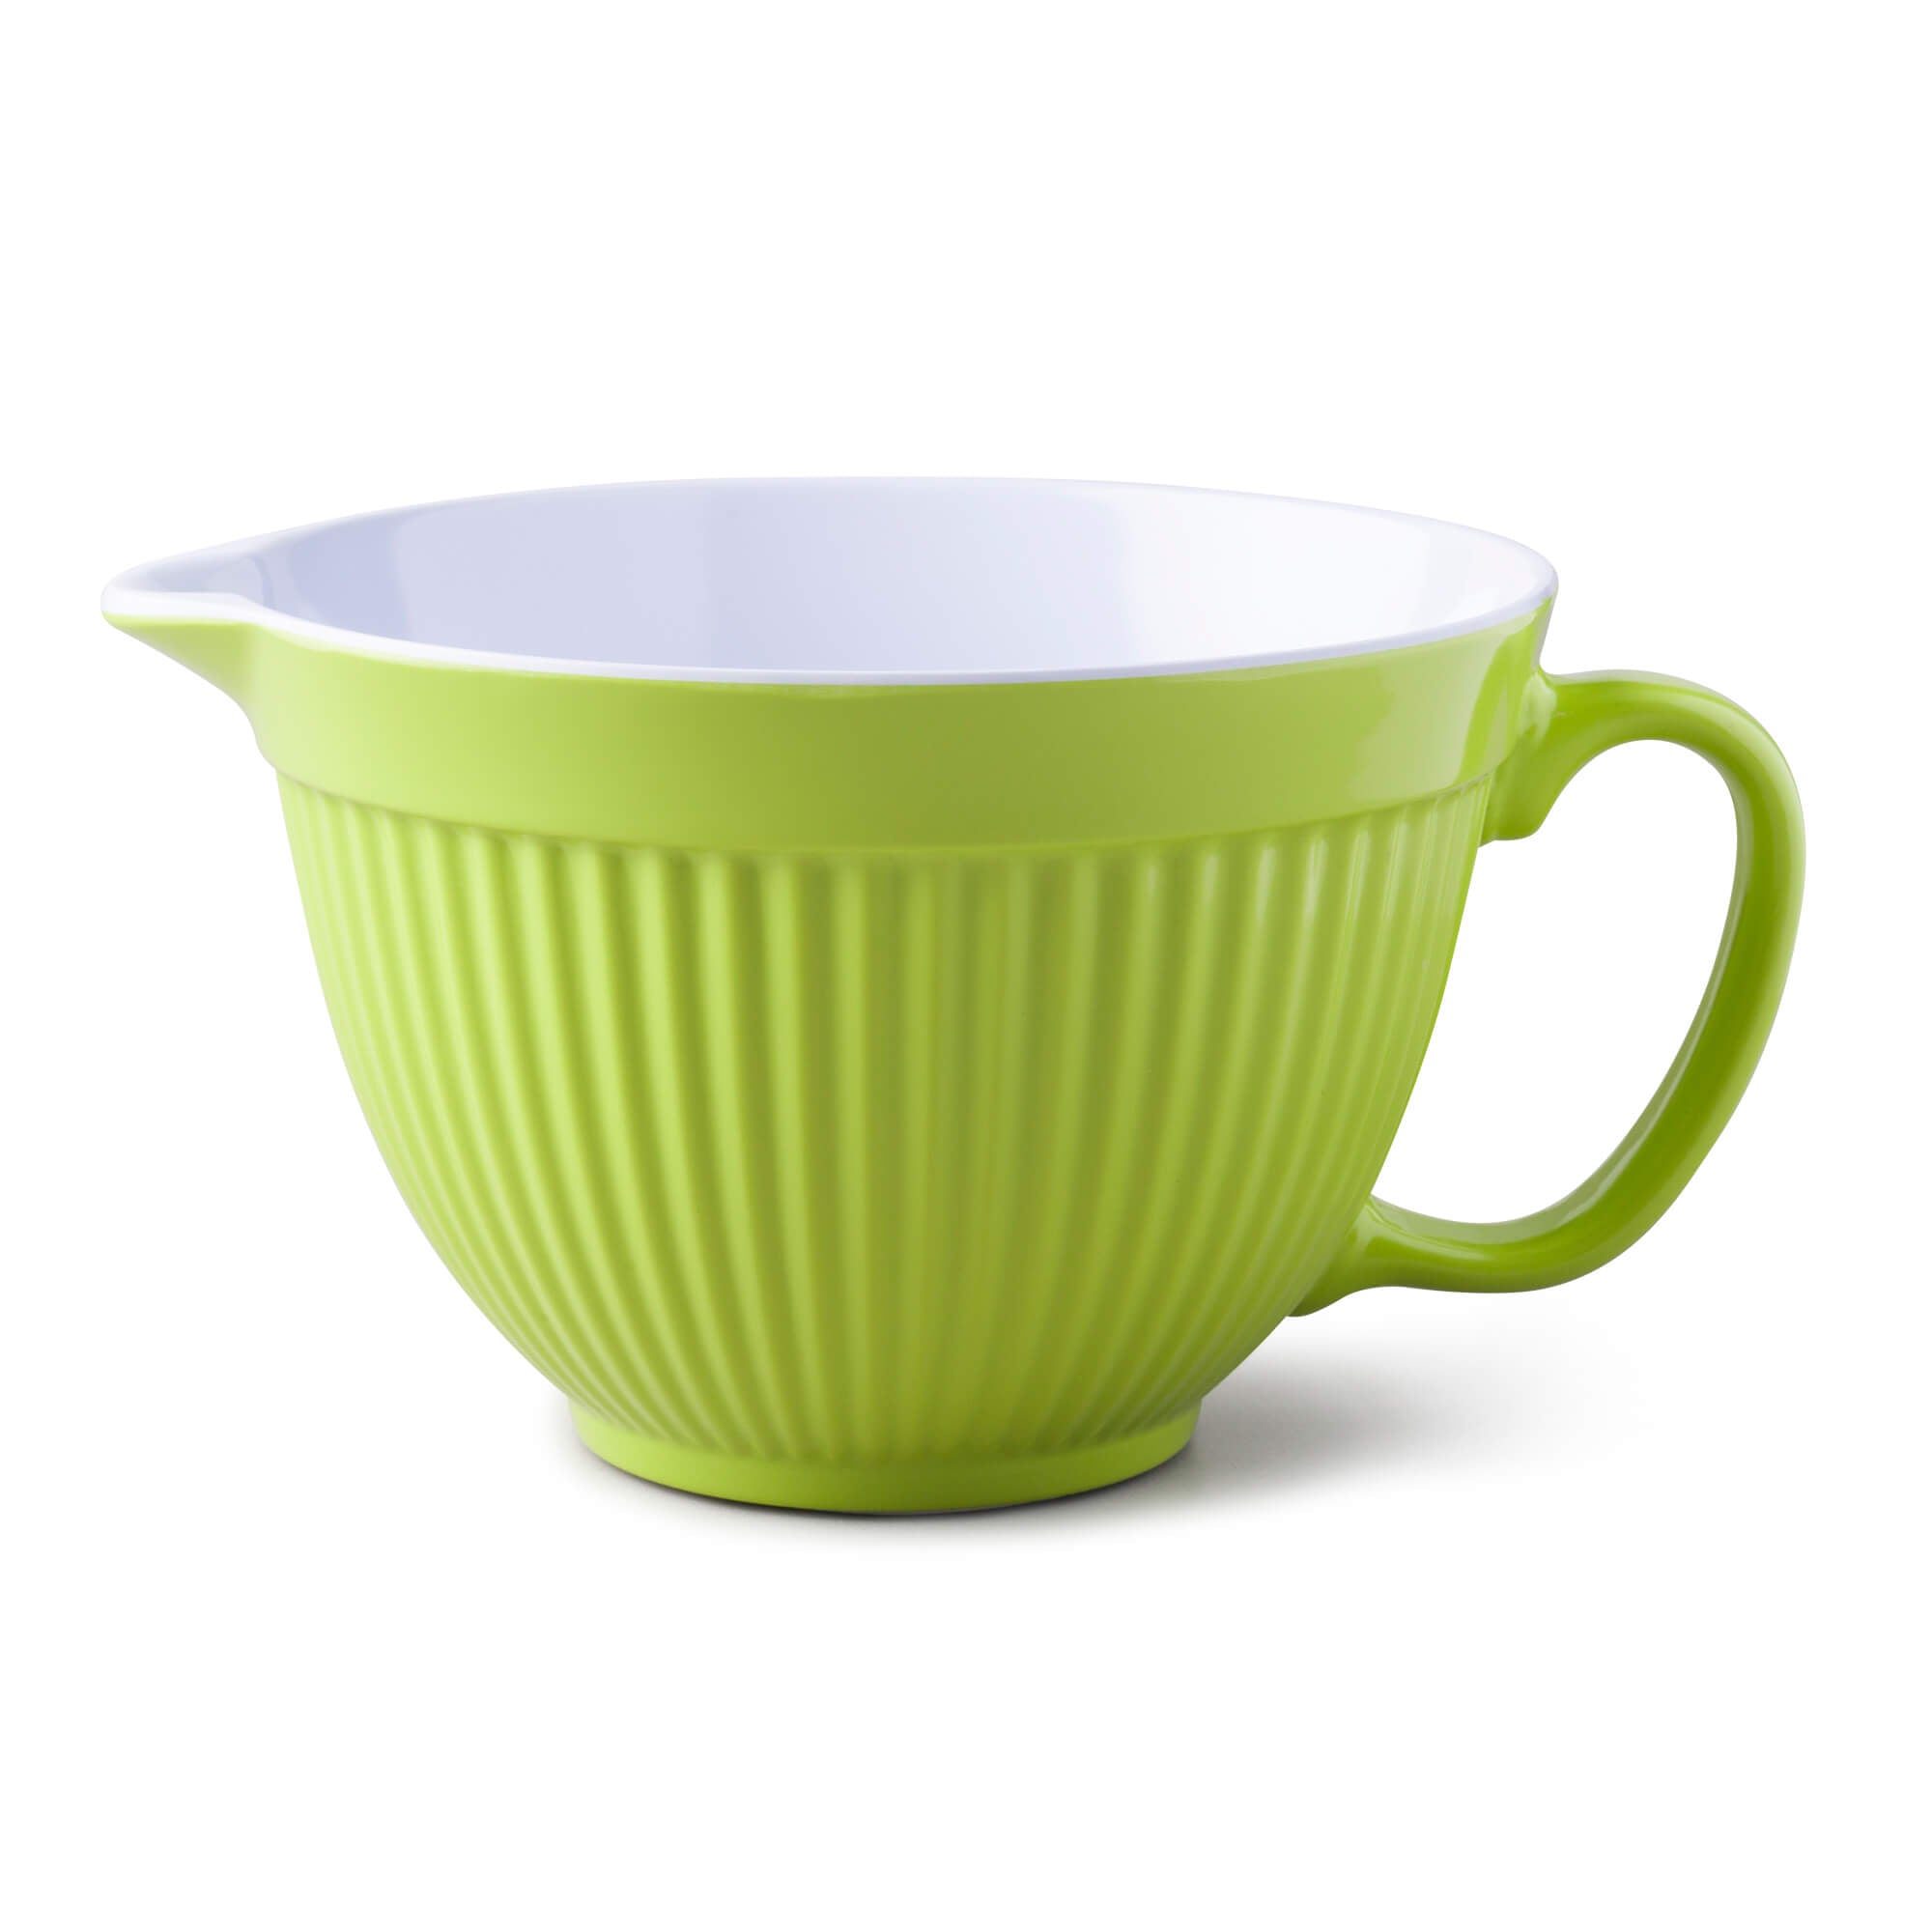 Zeal Mixing Bowl Jug in Lime